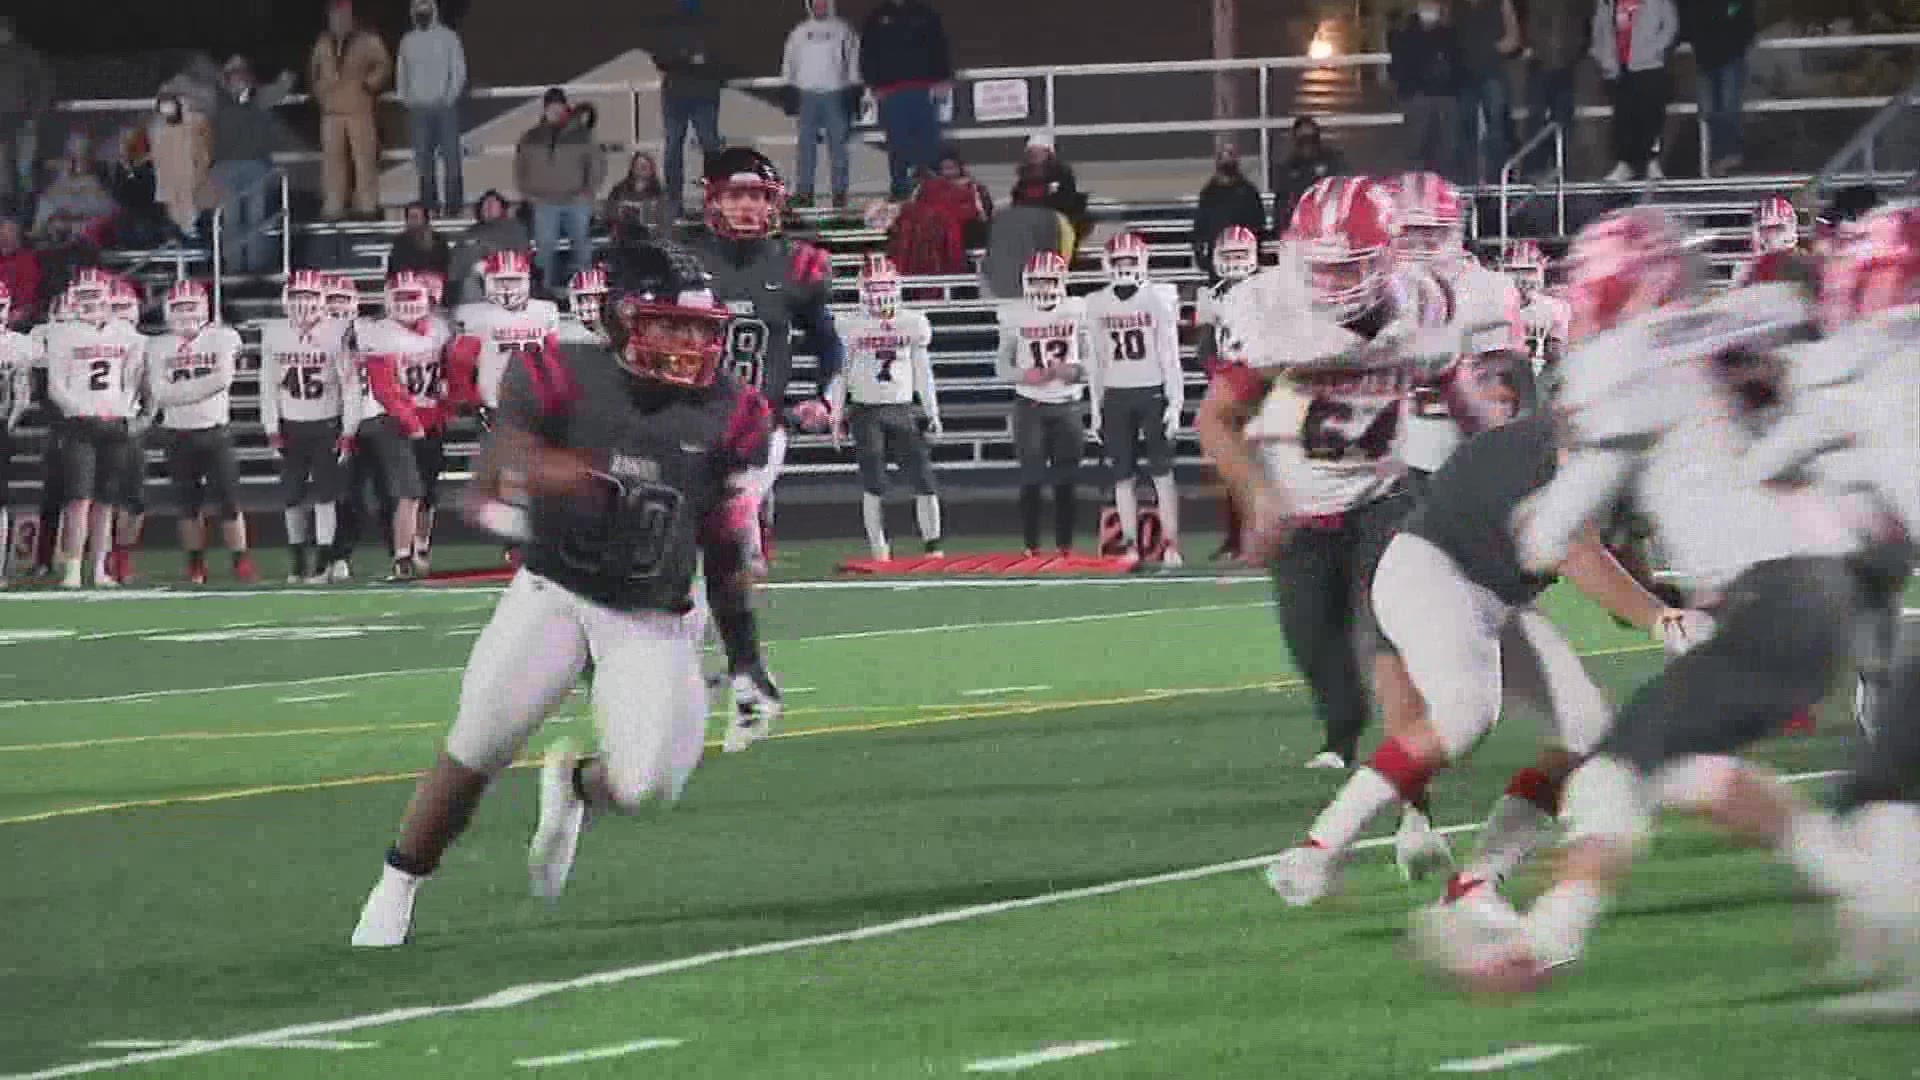 Dom Tiberi has all the highlights from the fourth week of high school football playoffs.